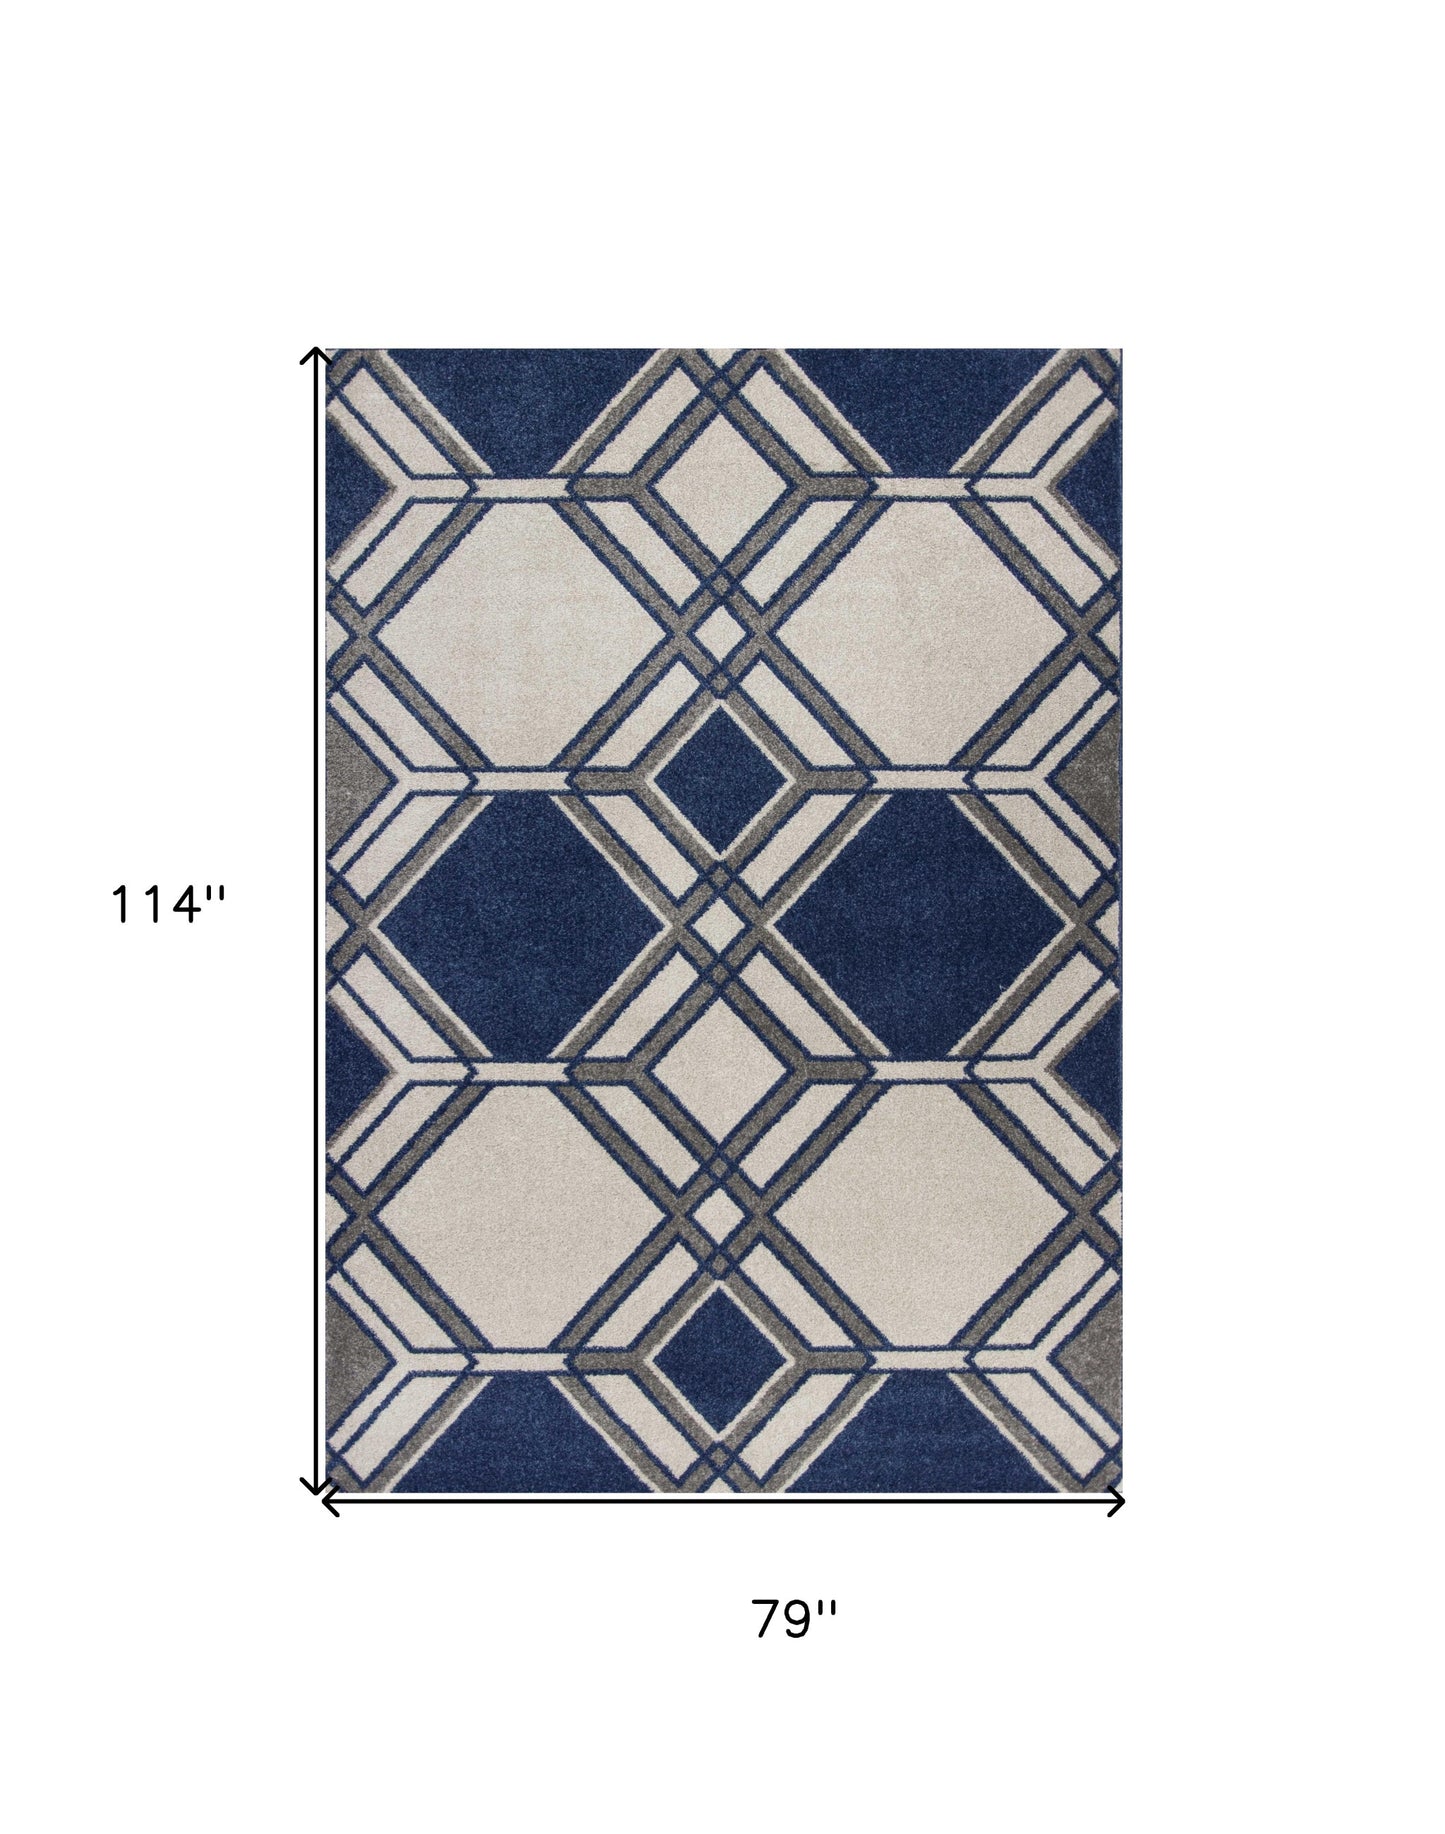 7' x 10' Ivory and Blue Geometric Indoor Outdoor Area Rug